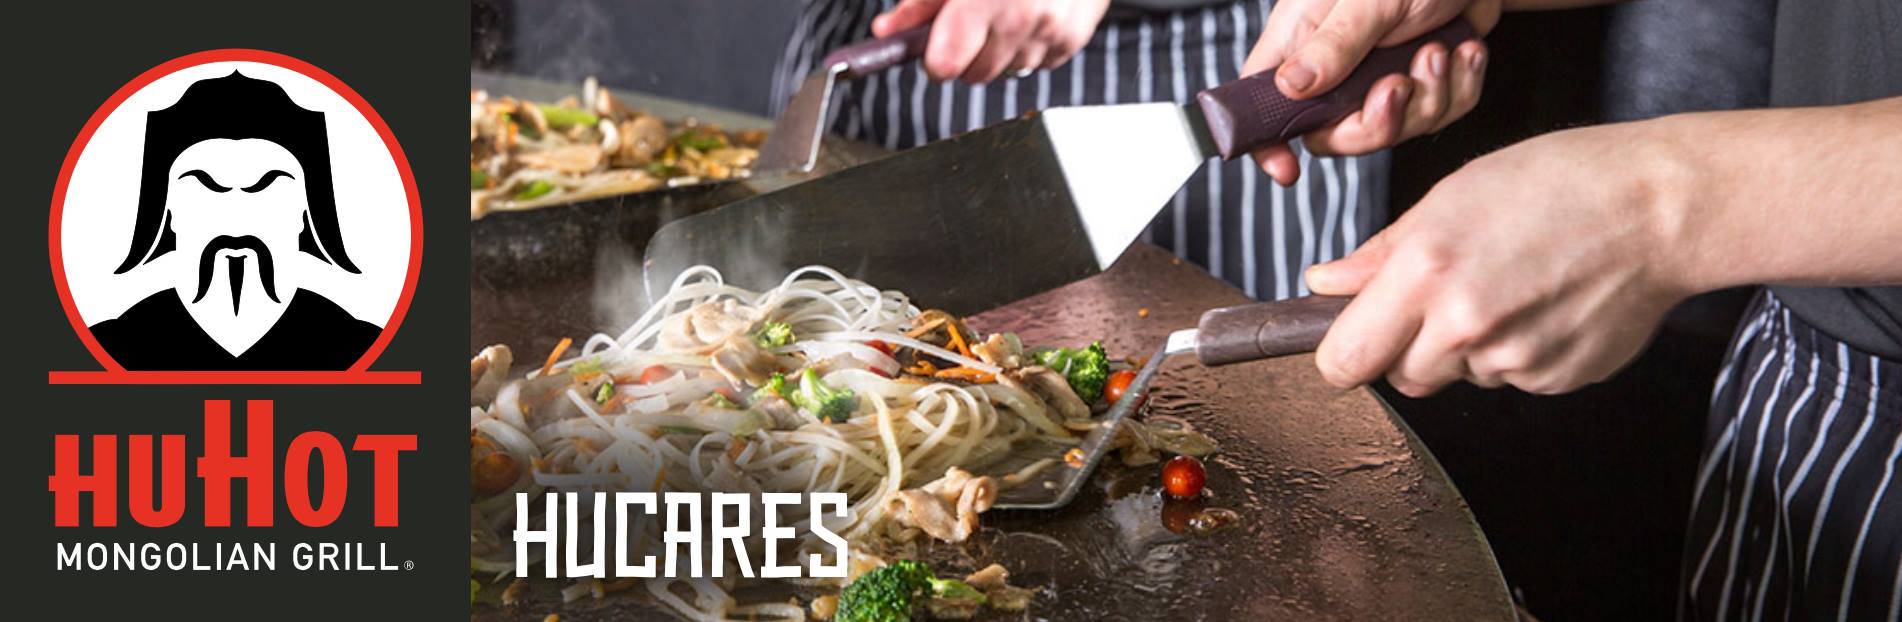 Image of HuHot Ad with text "HuCares" and image of cooking